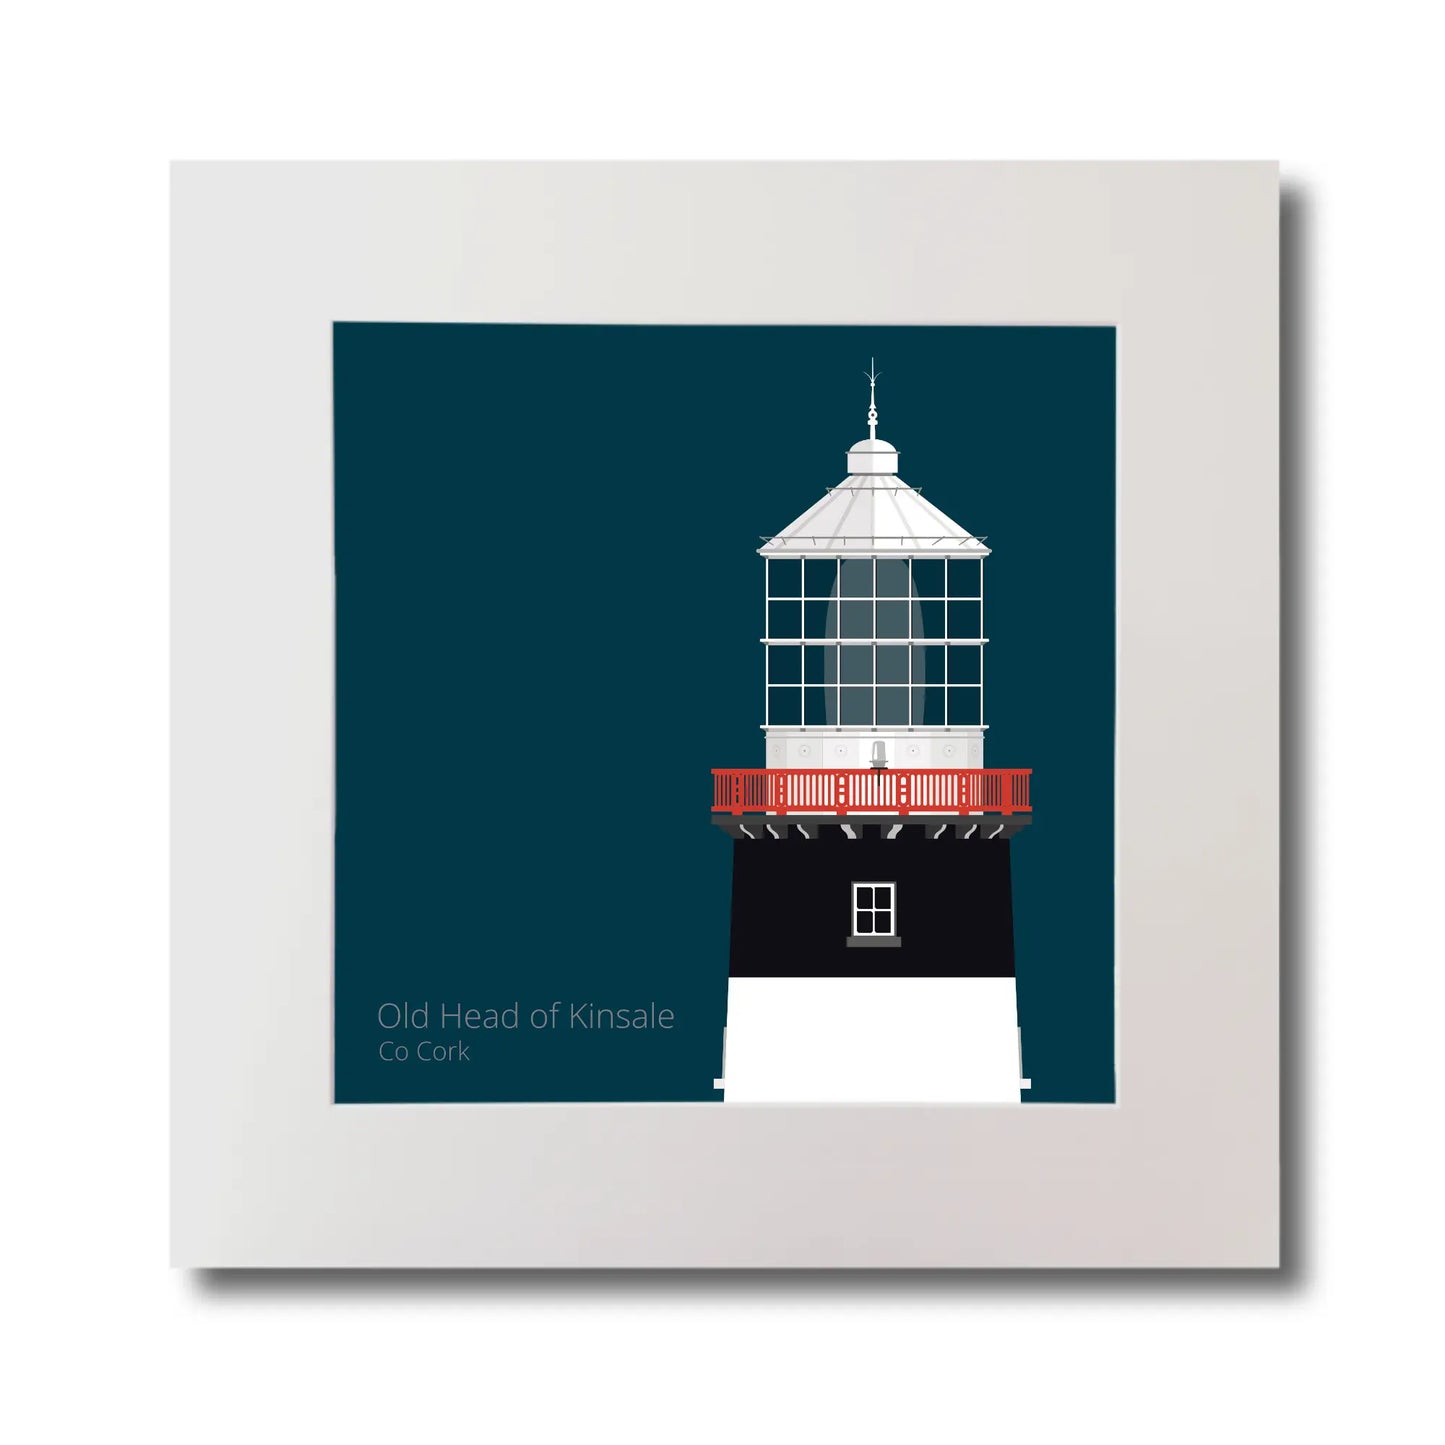 Illustration of Old Head of Kinsale lighthouse on a midnight blue background, mounted and measuring 30x30cm.